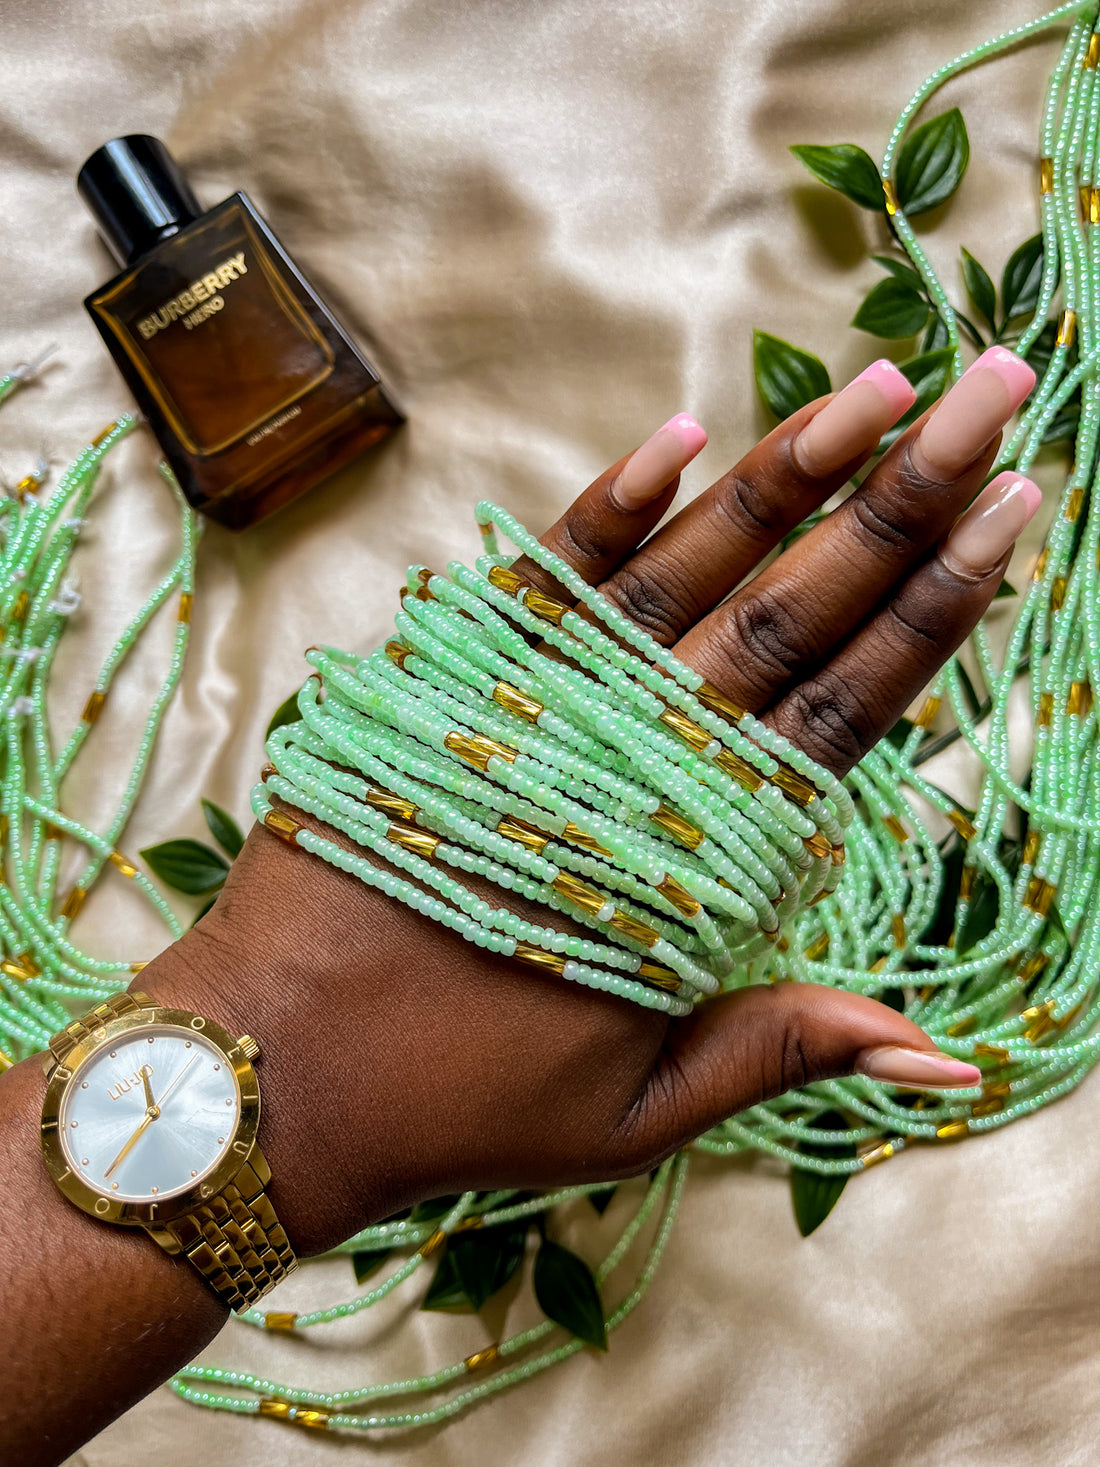 Pistachio African Waist bead - Pick 5 for 50% Off at checkout 🔥